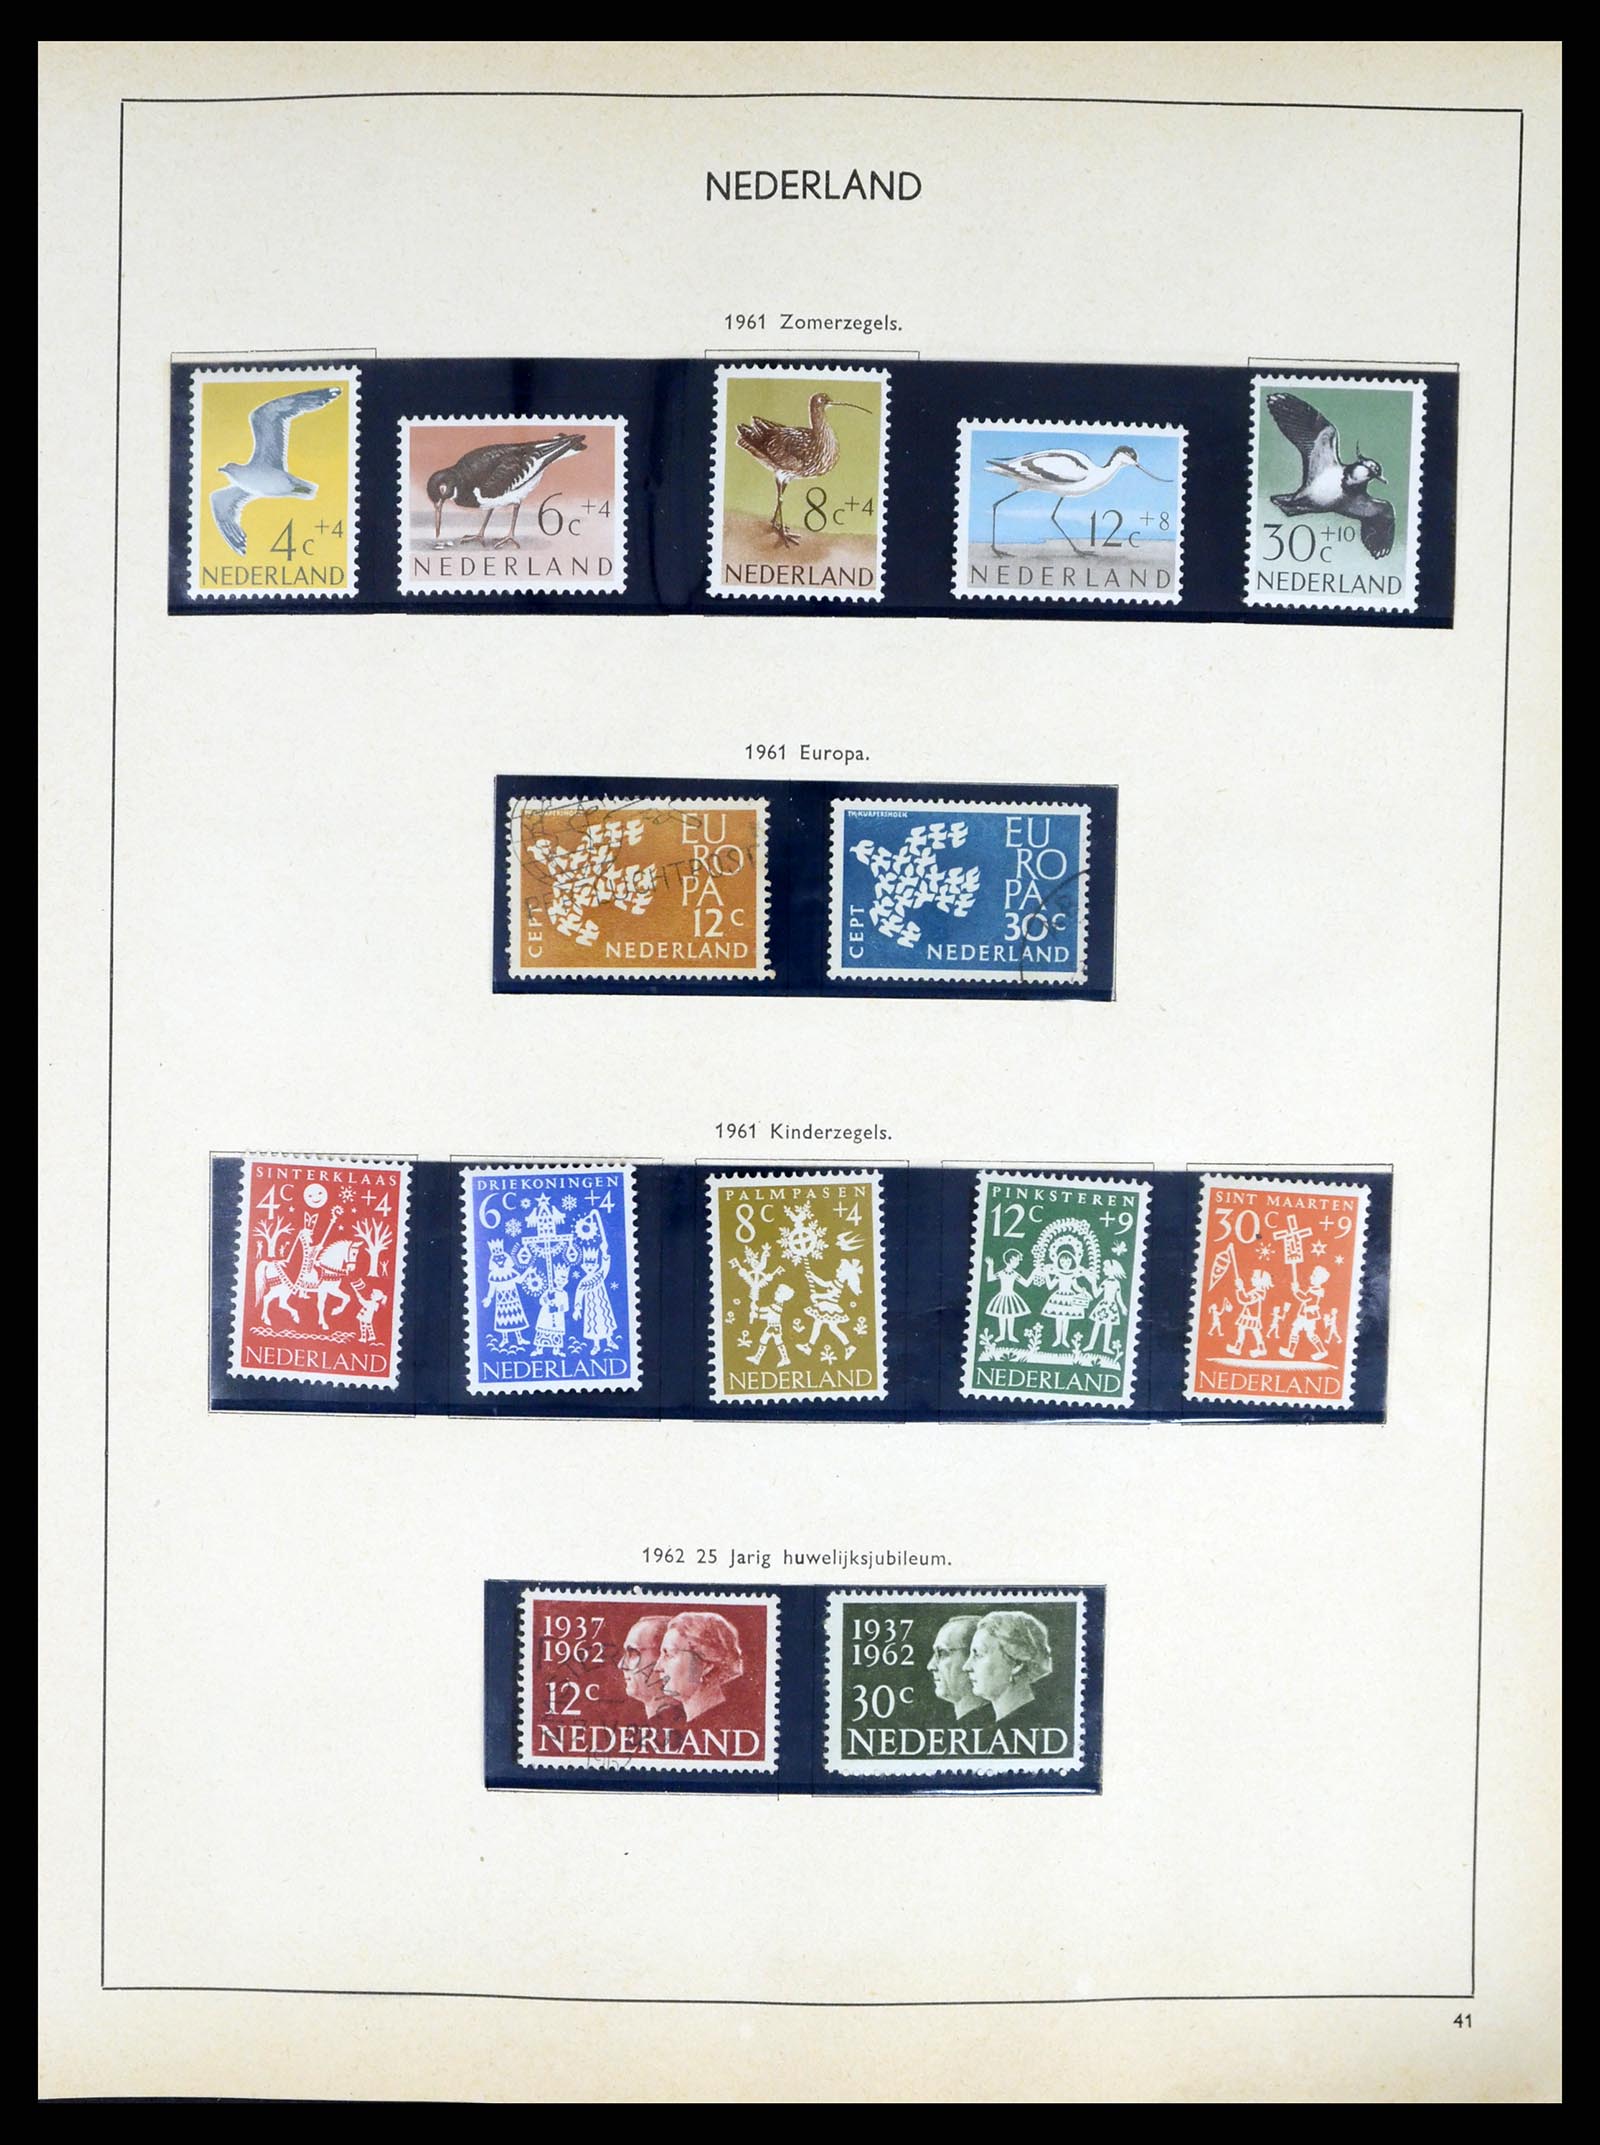 37618 037 - Stamp collection 37618 Netherlands and territories 1852-1972.